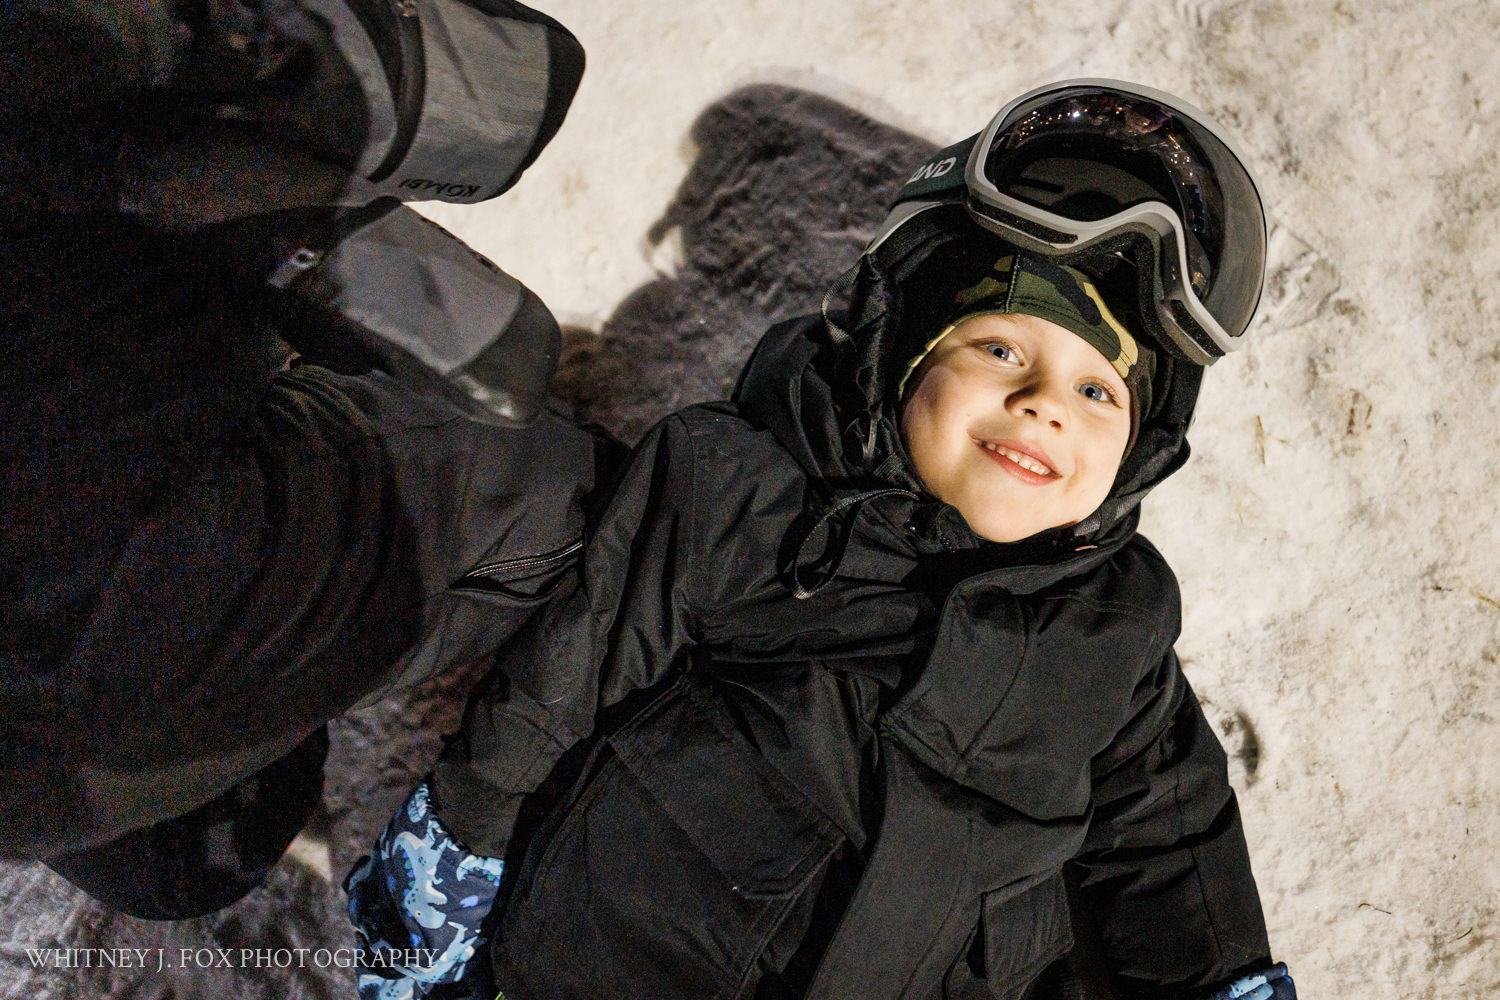 39 winter kids welcome to winter 2022 lost valley auburn maine documentary event photographer whitney j fox 3067 w